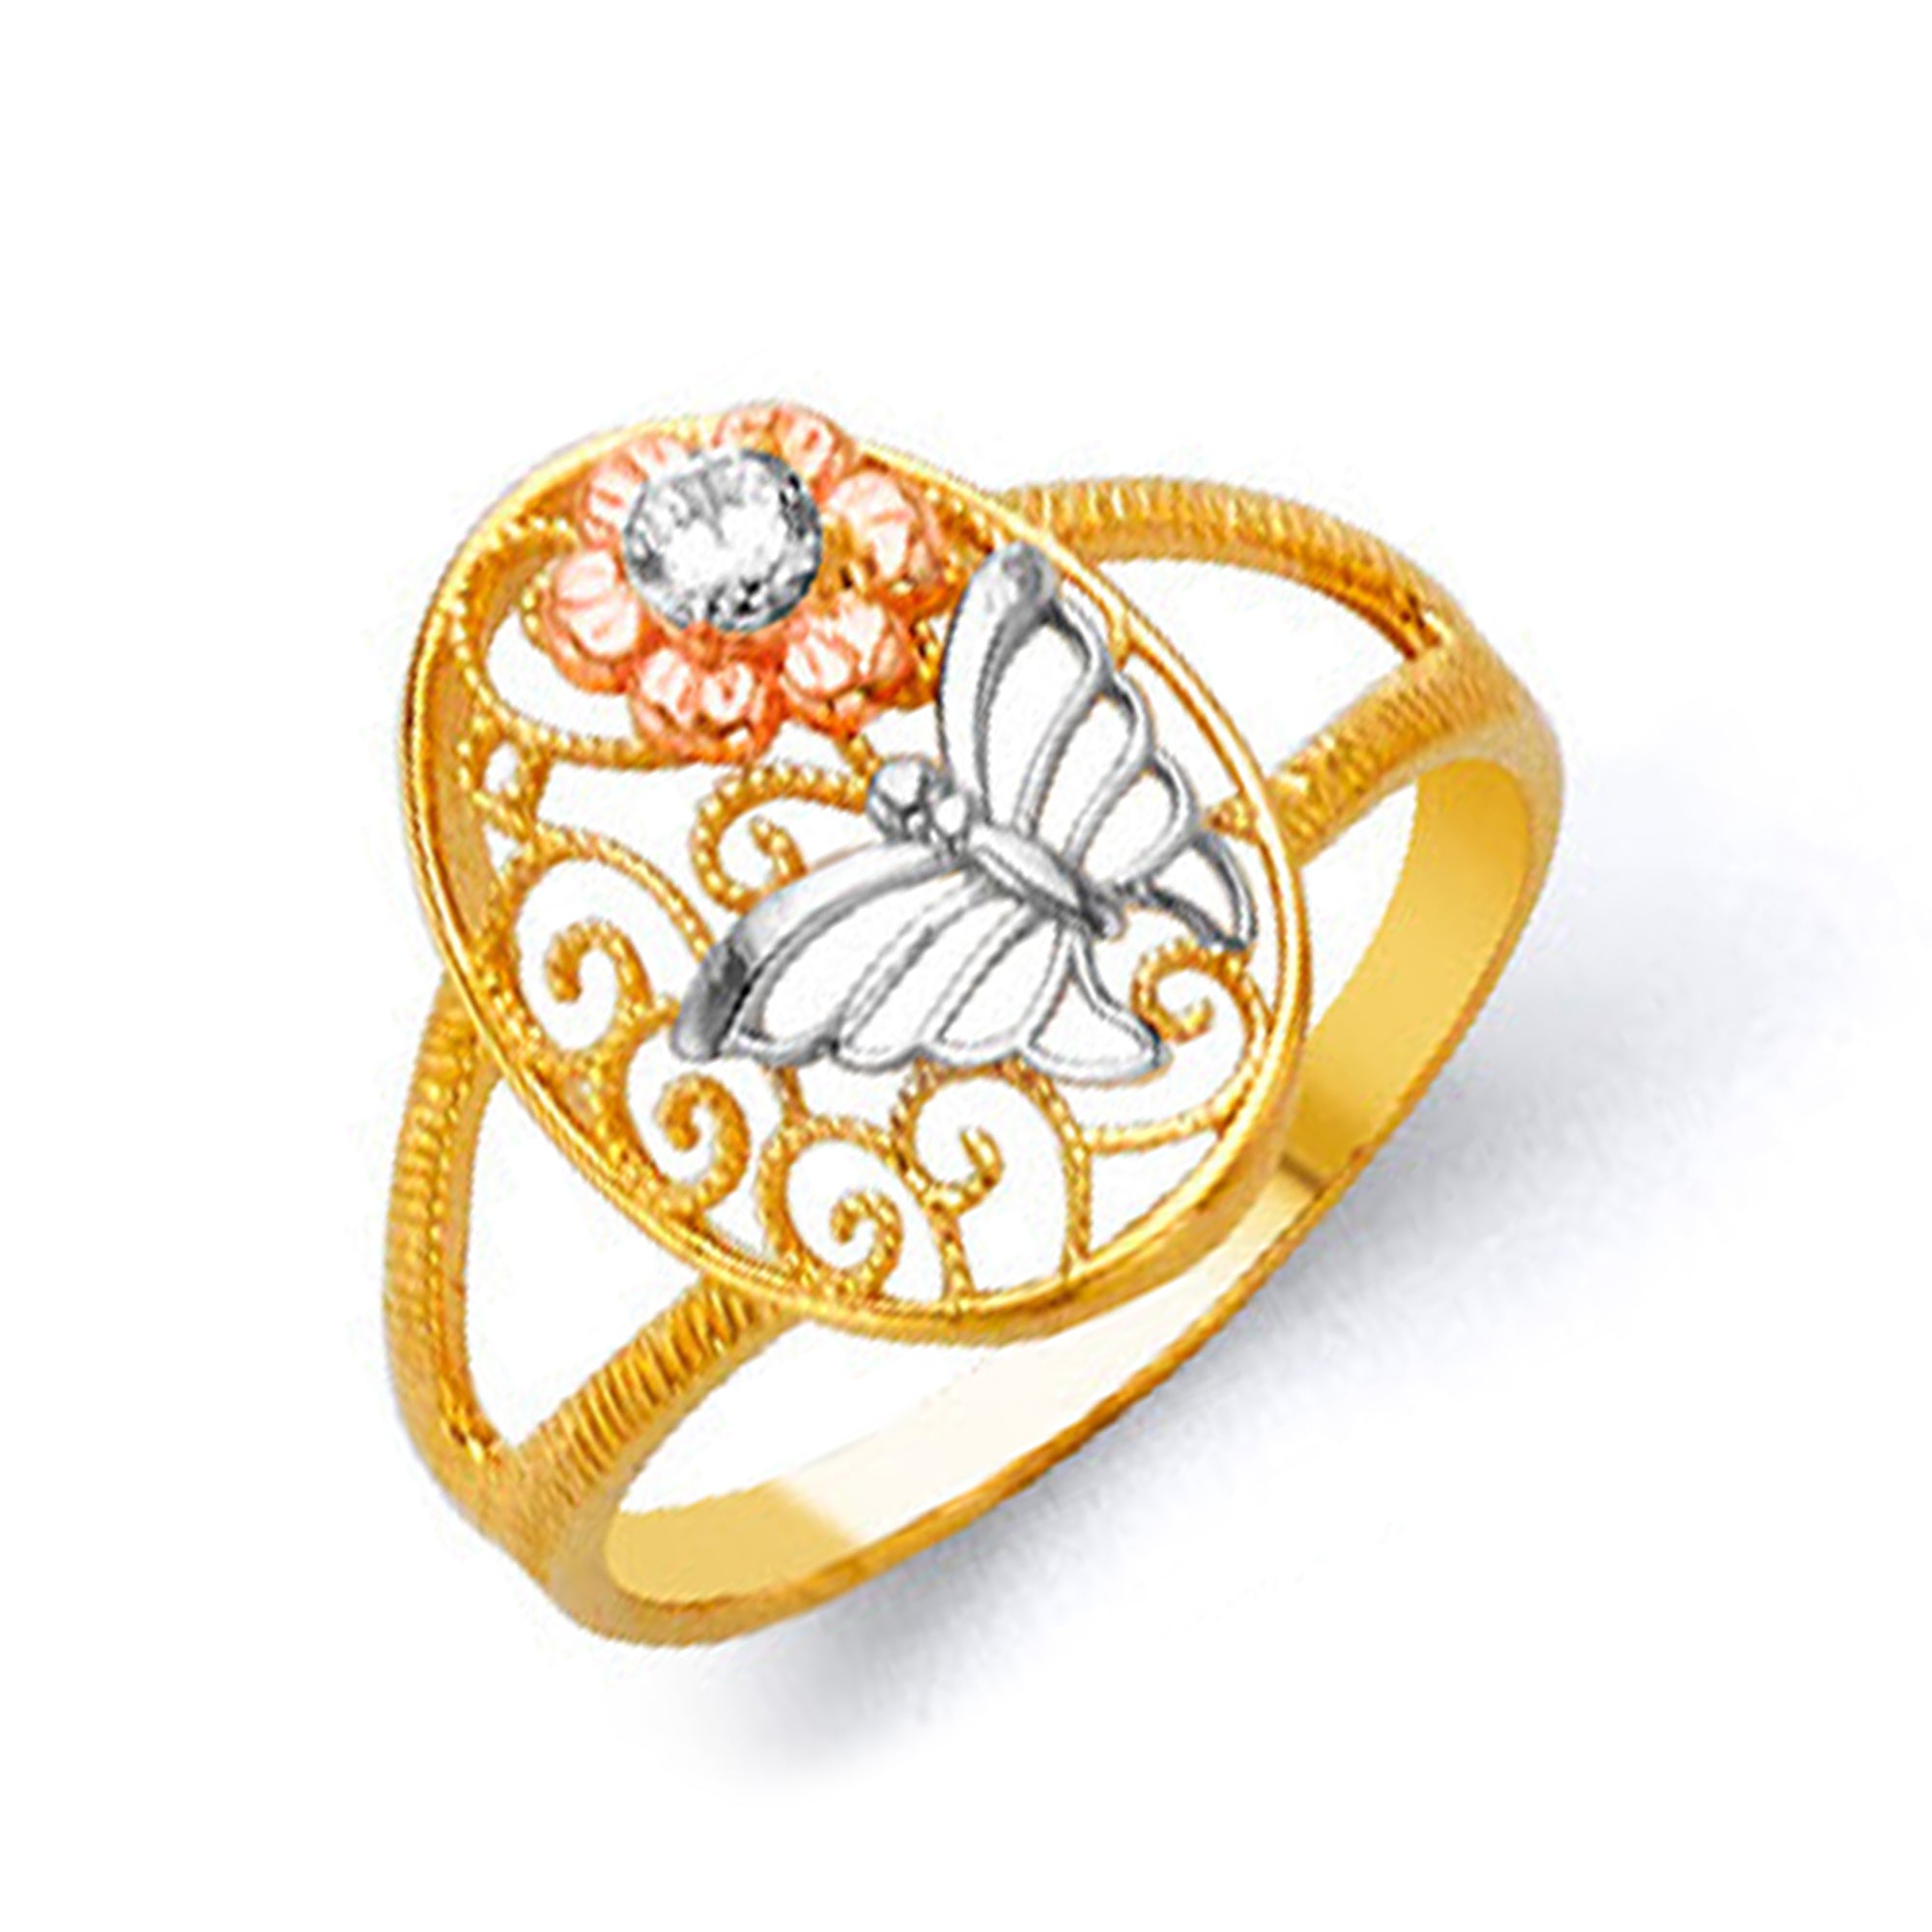 Reigning Tricolor Butterfly Ring in Solid Gold 